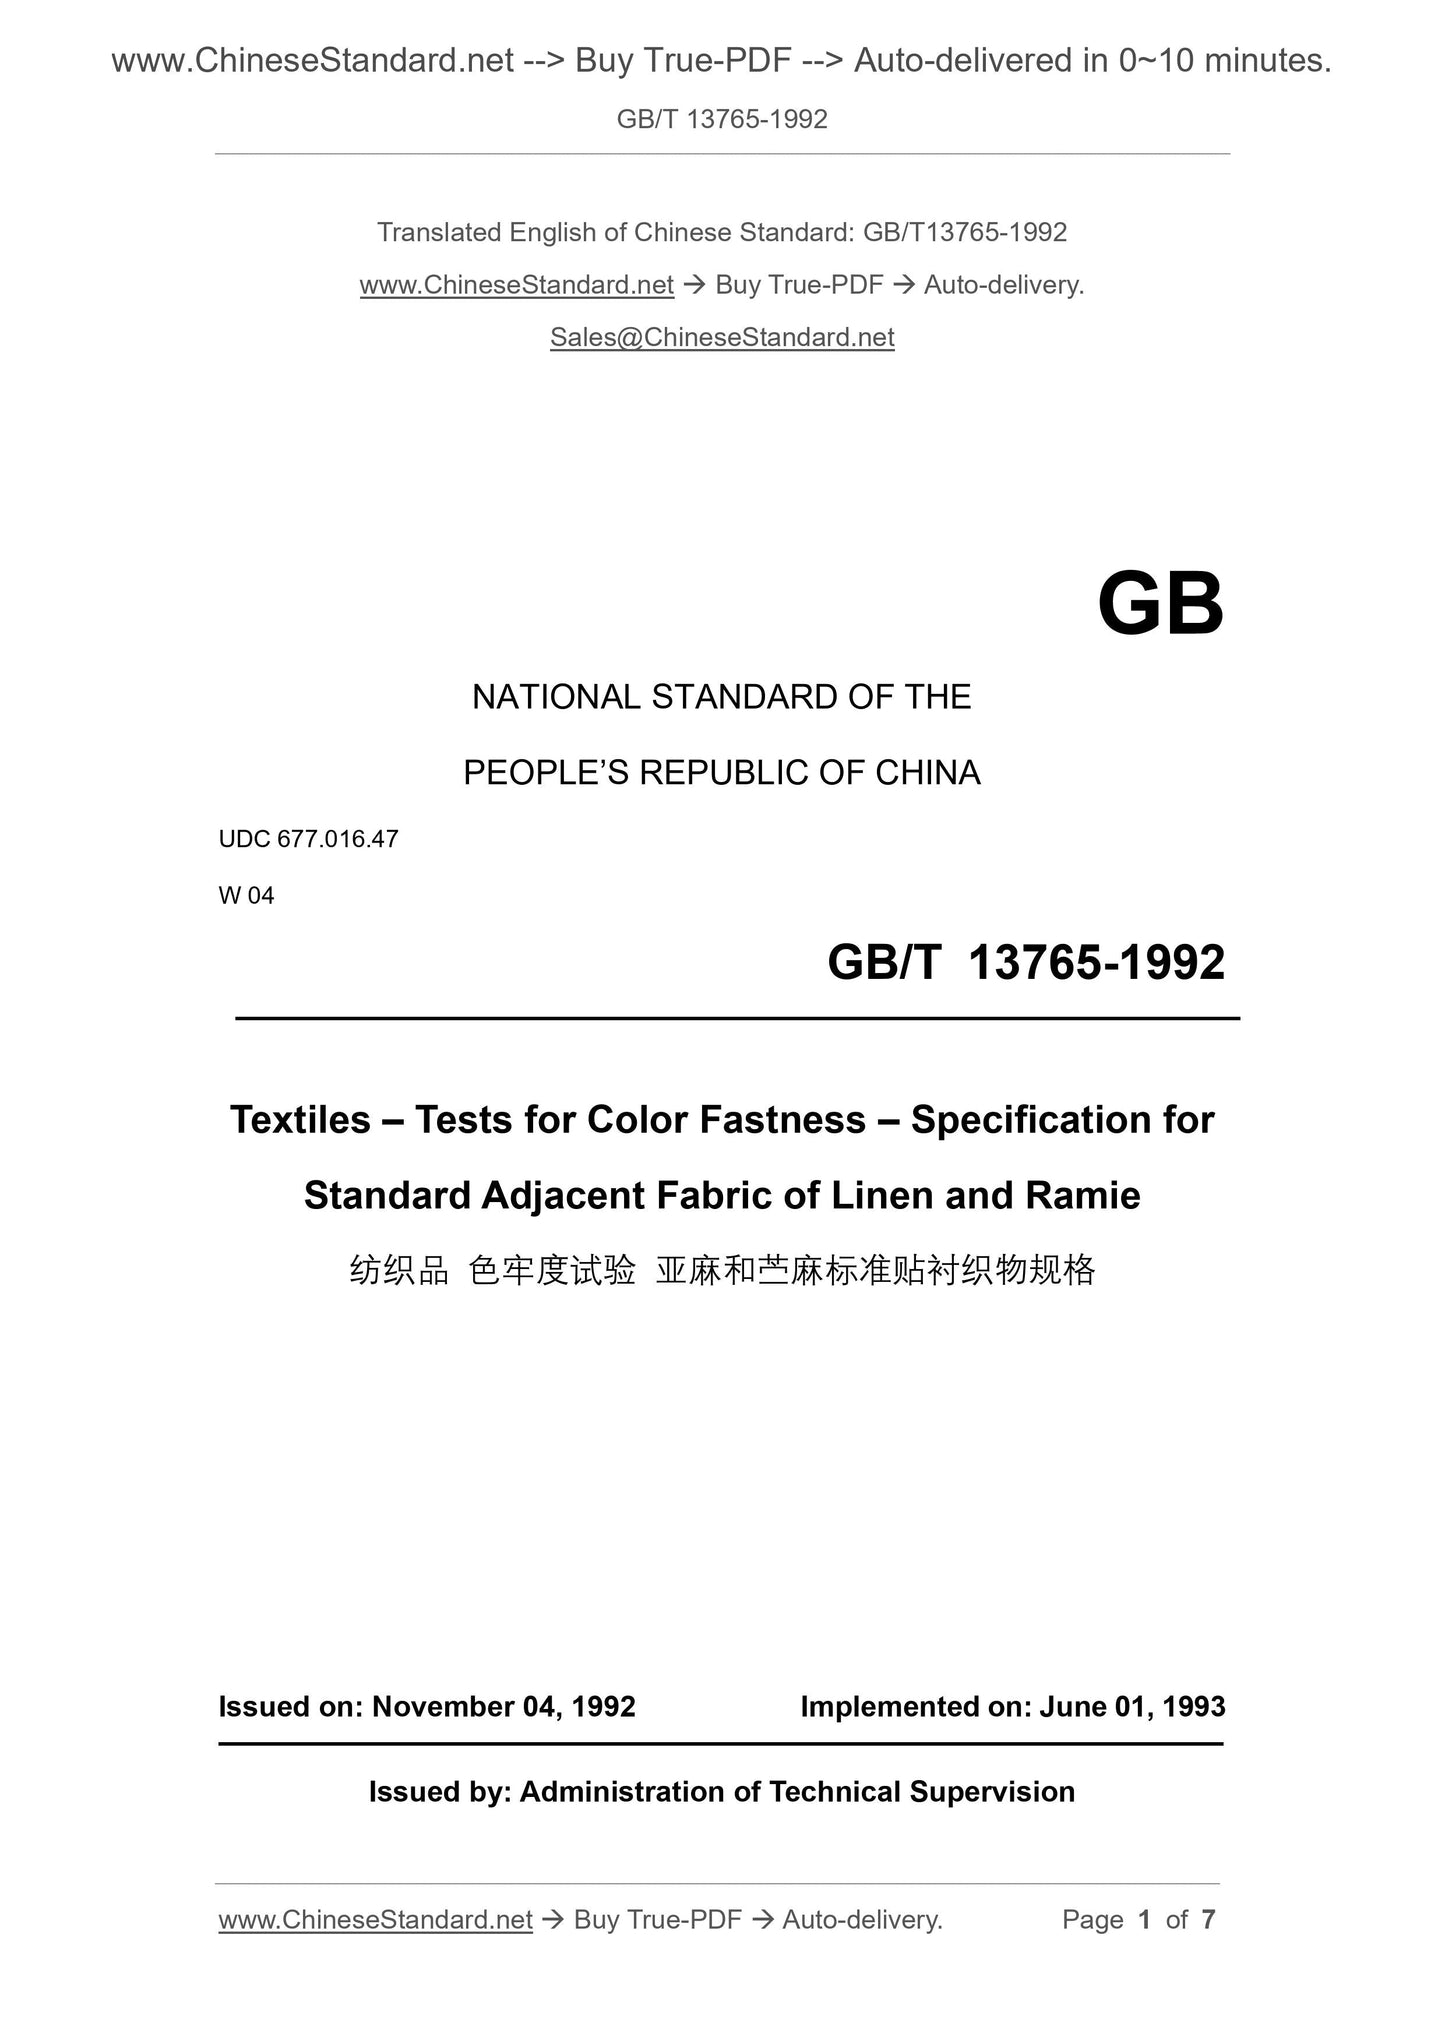 GB/T 13765-1992 Page 1